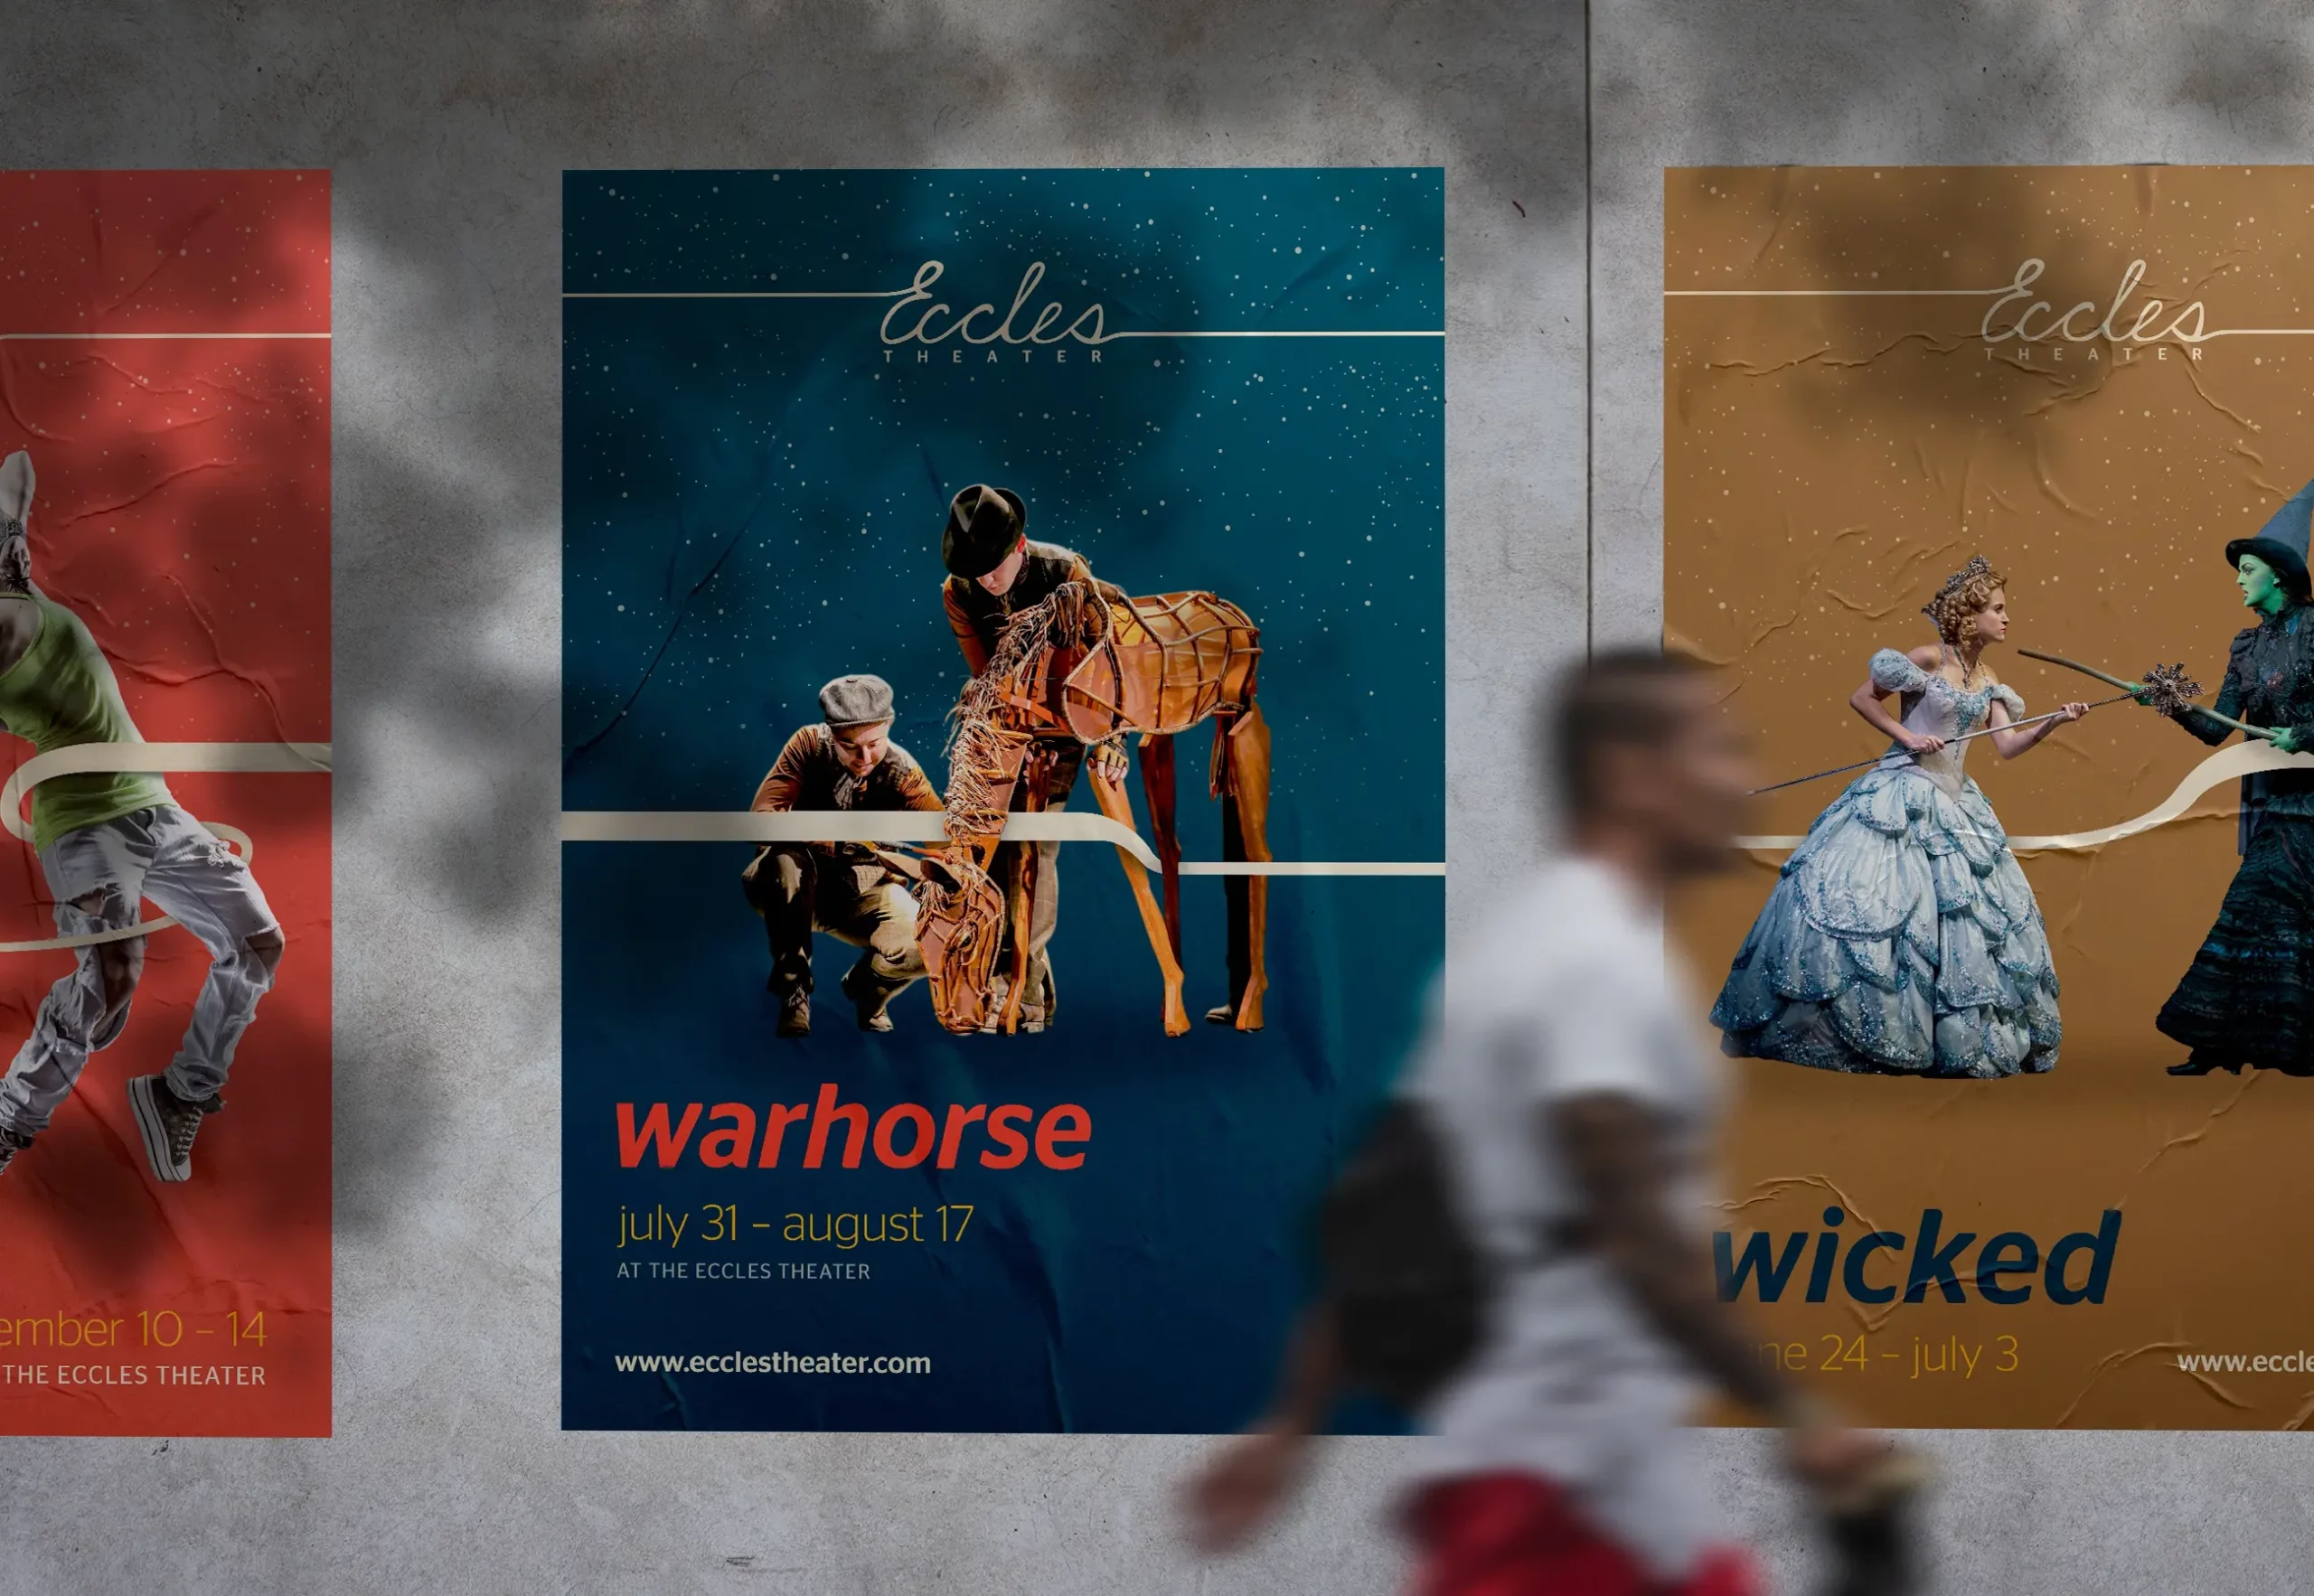 Eccles Theater Show Posters